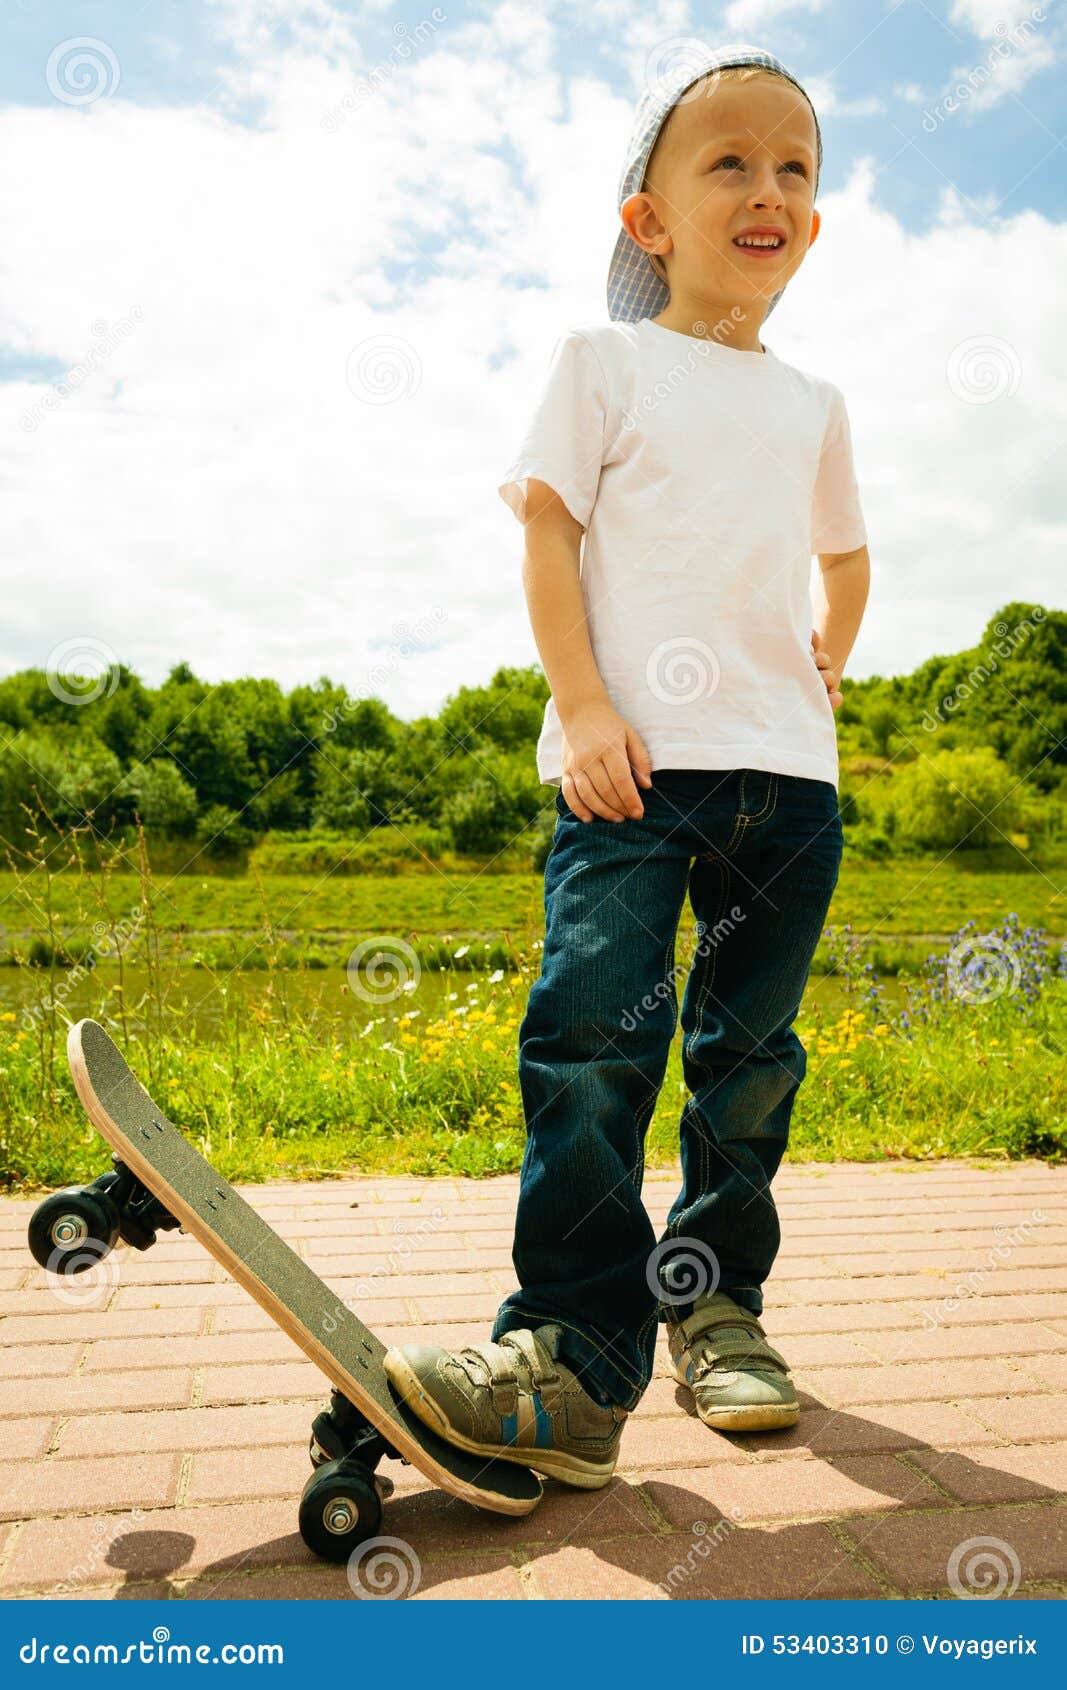 Skater Boy Child with His Skateboard. Outdoor Activity. Stock Photo ...